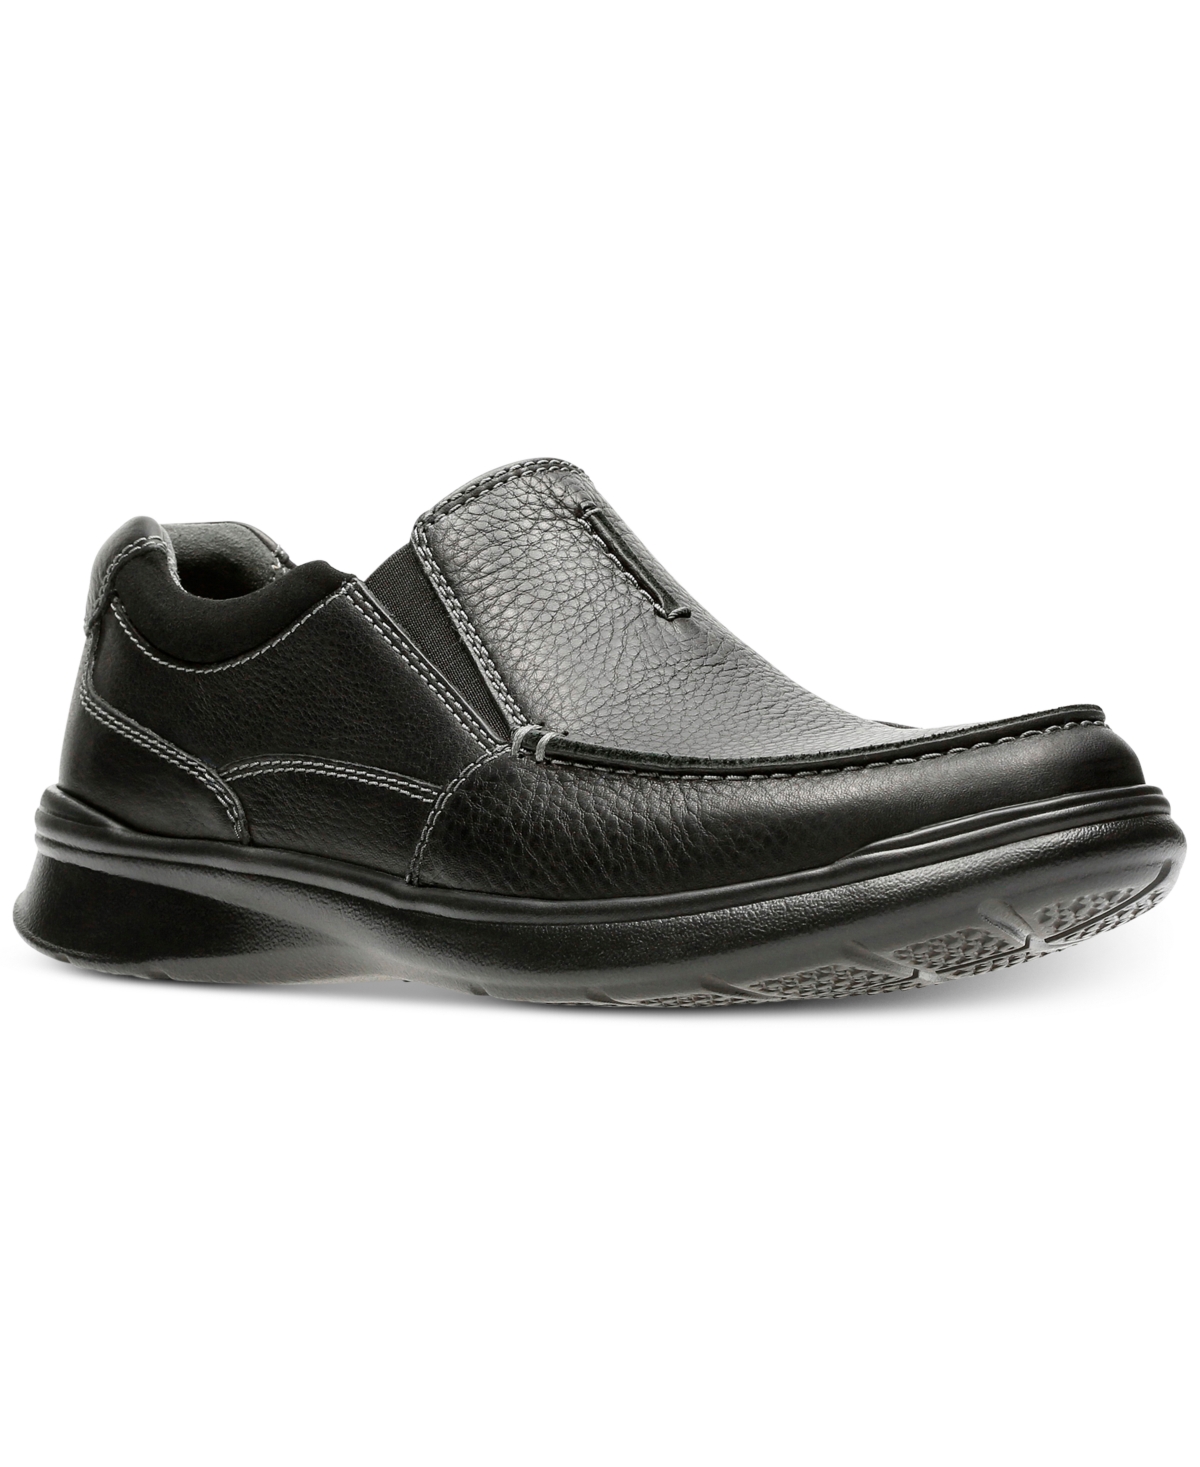 Men's Cotrell Free Leather Slip-Ons - Black Oily Leather